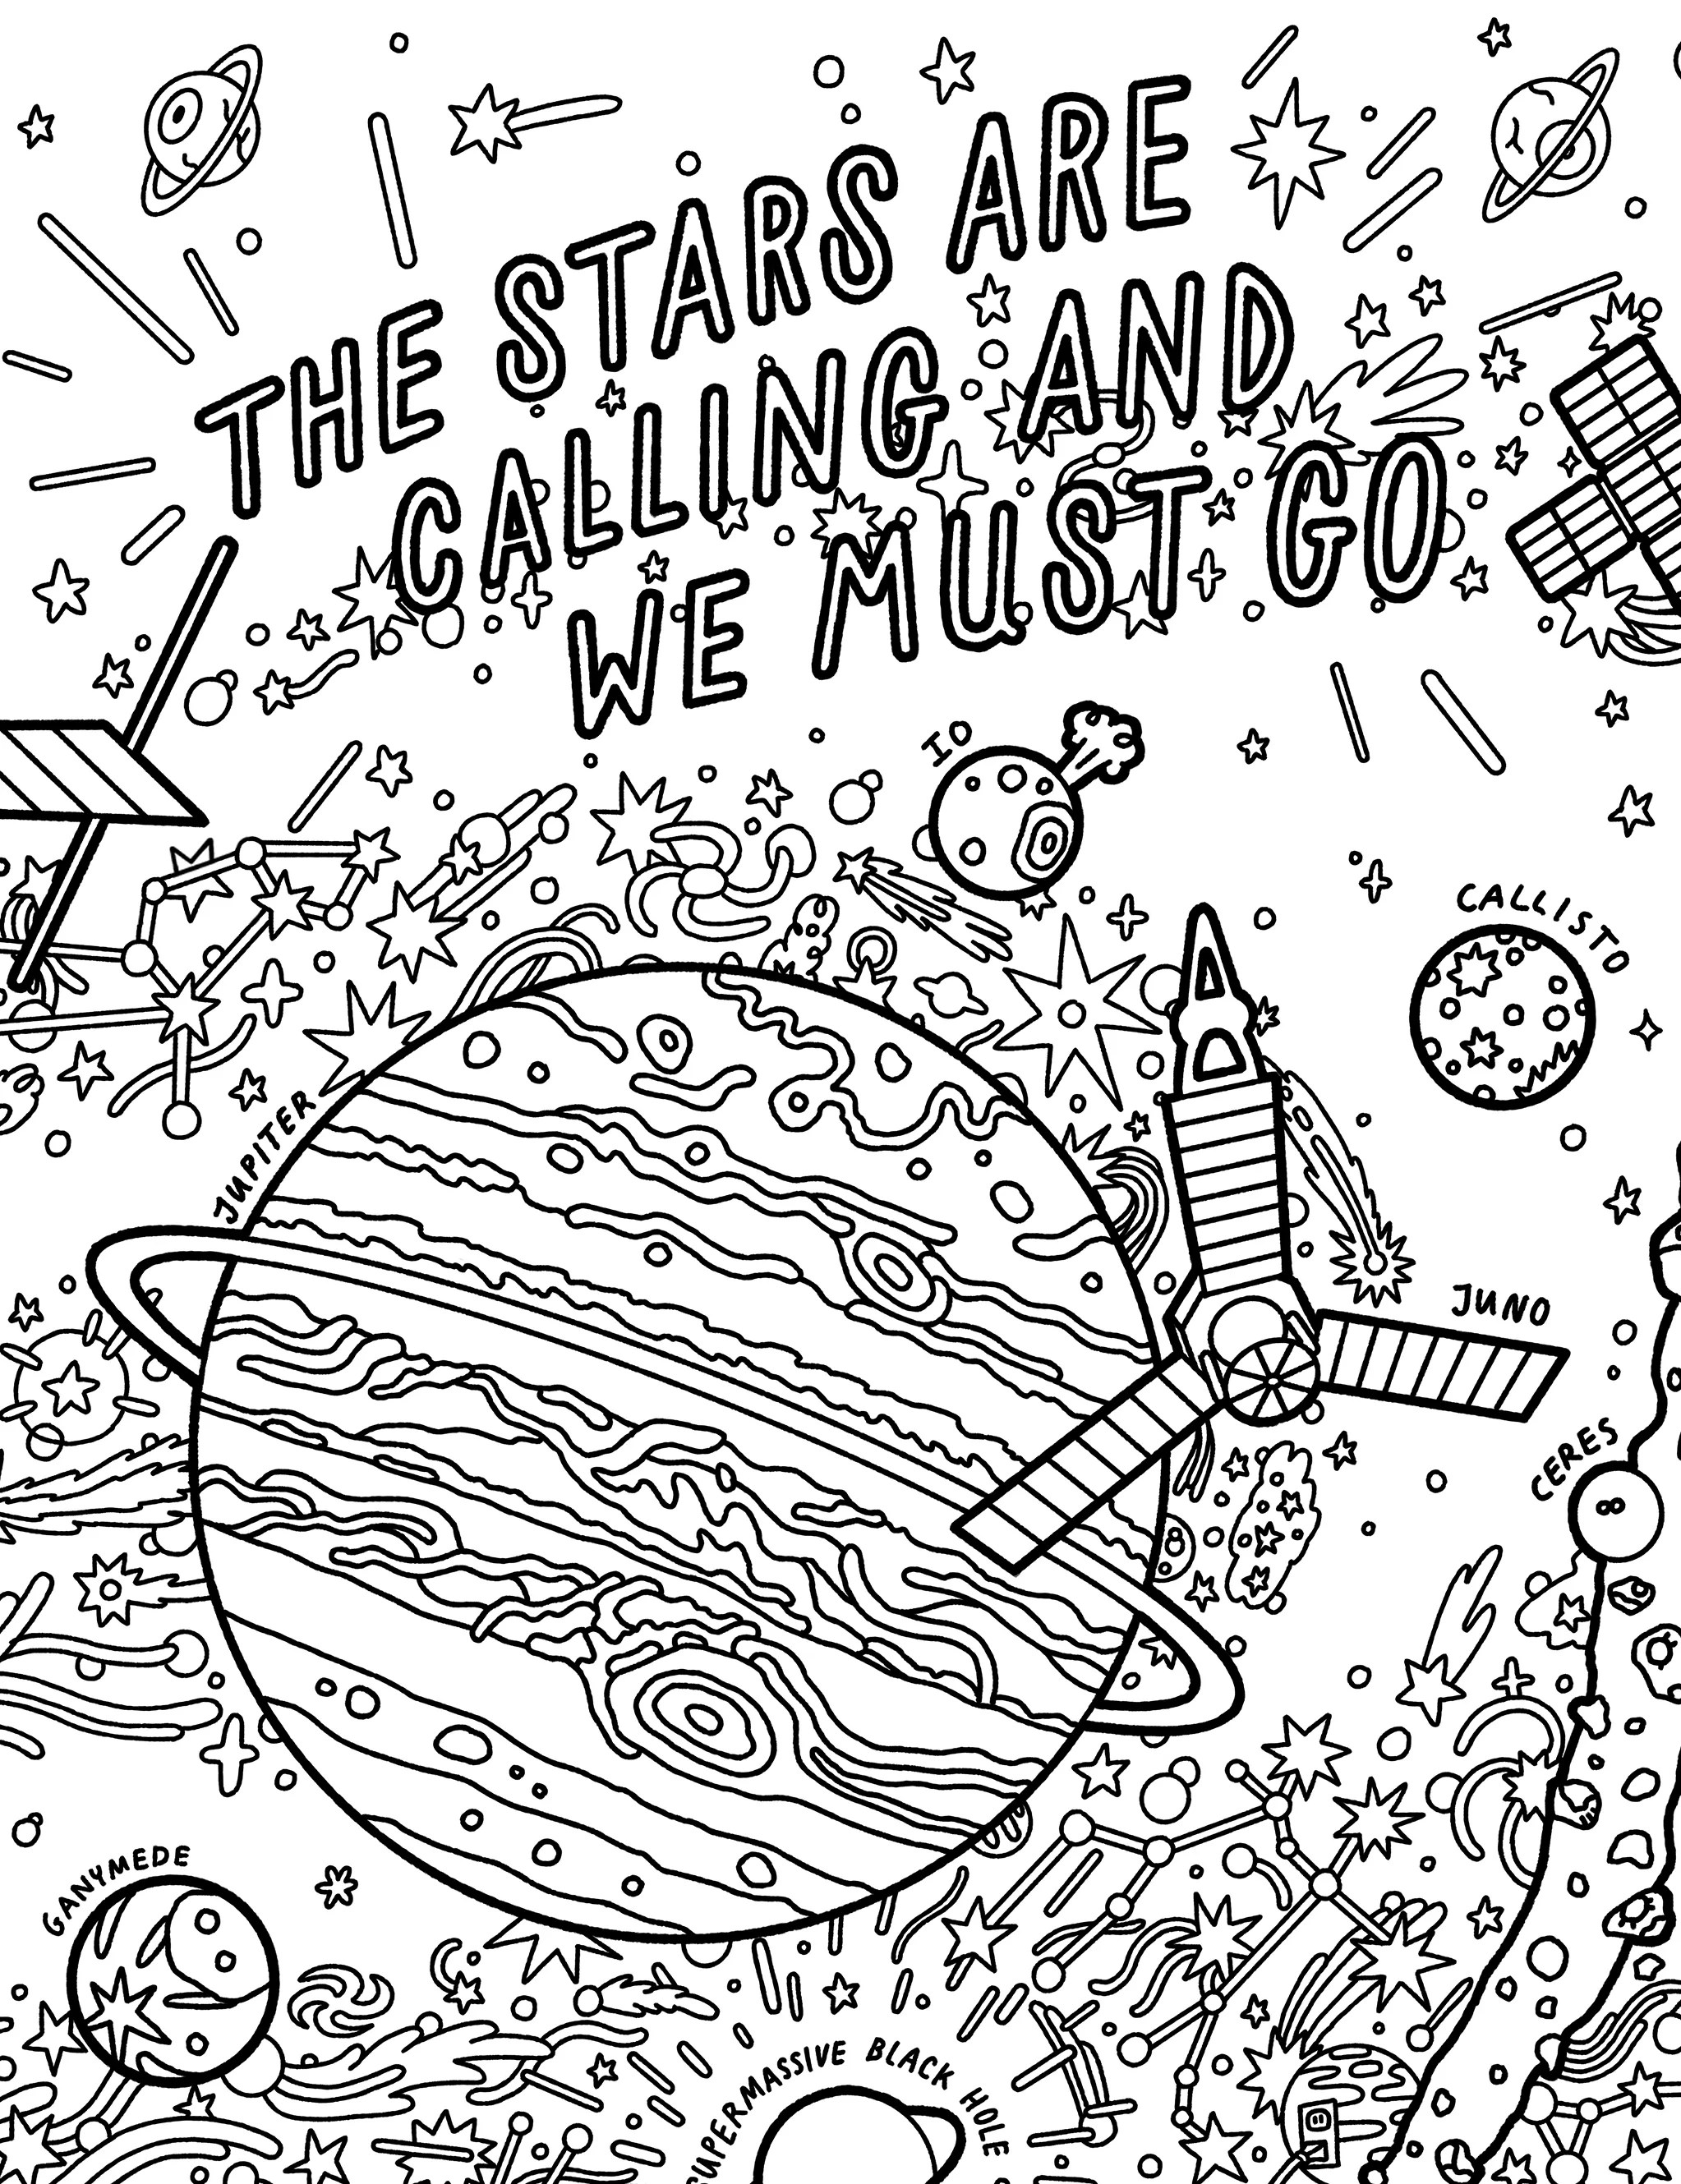 coloring page featuring Saturn, Uranus, Neptune, some of their moons, the Cassini-Huygens spacecraft, and New Horizons